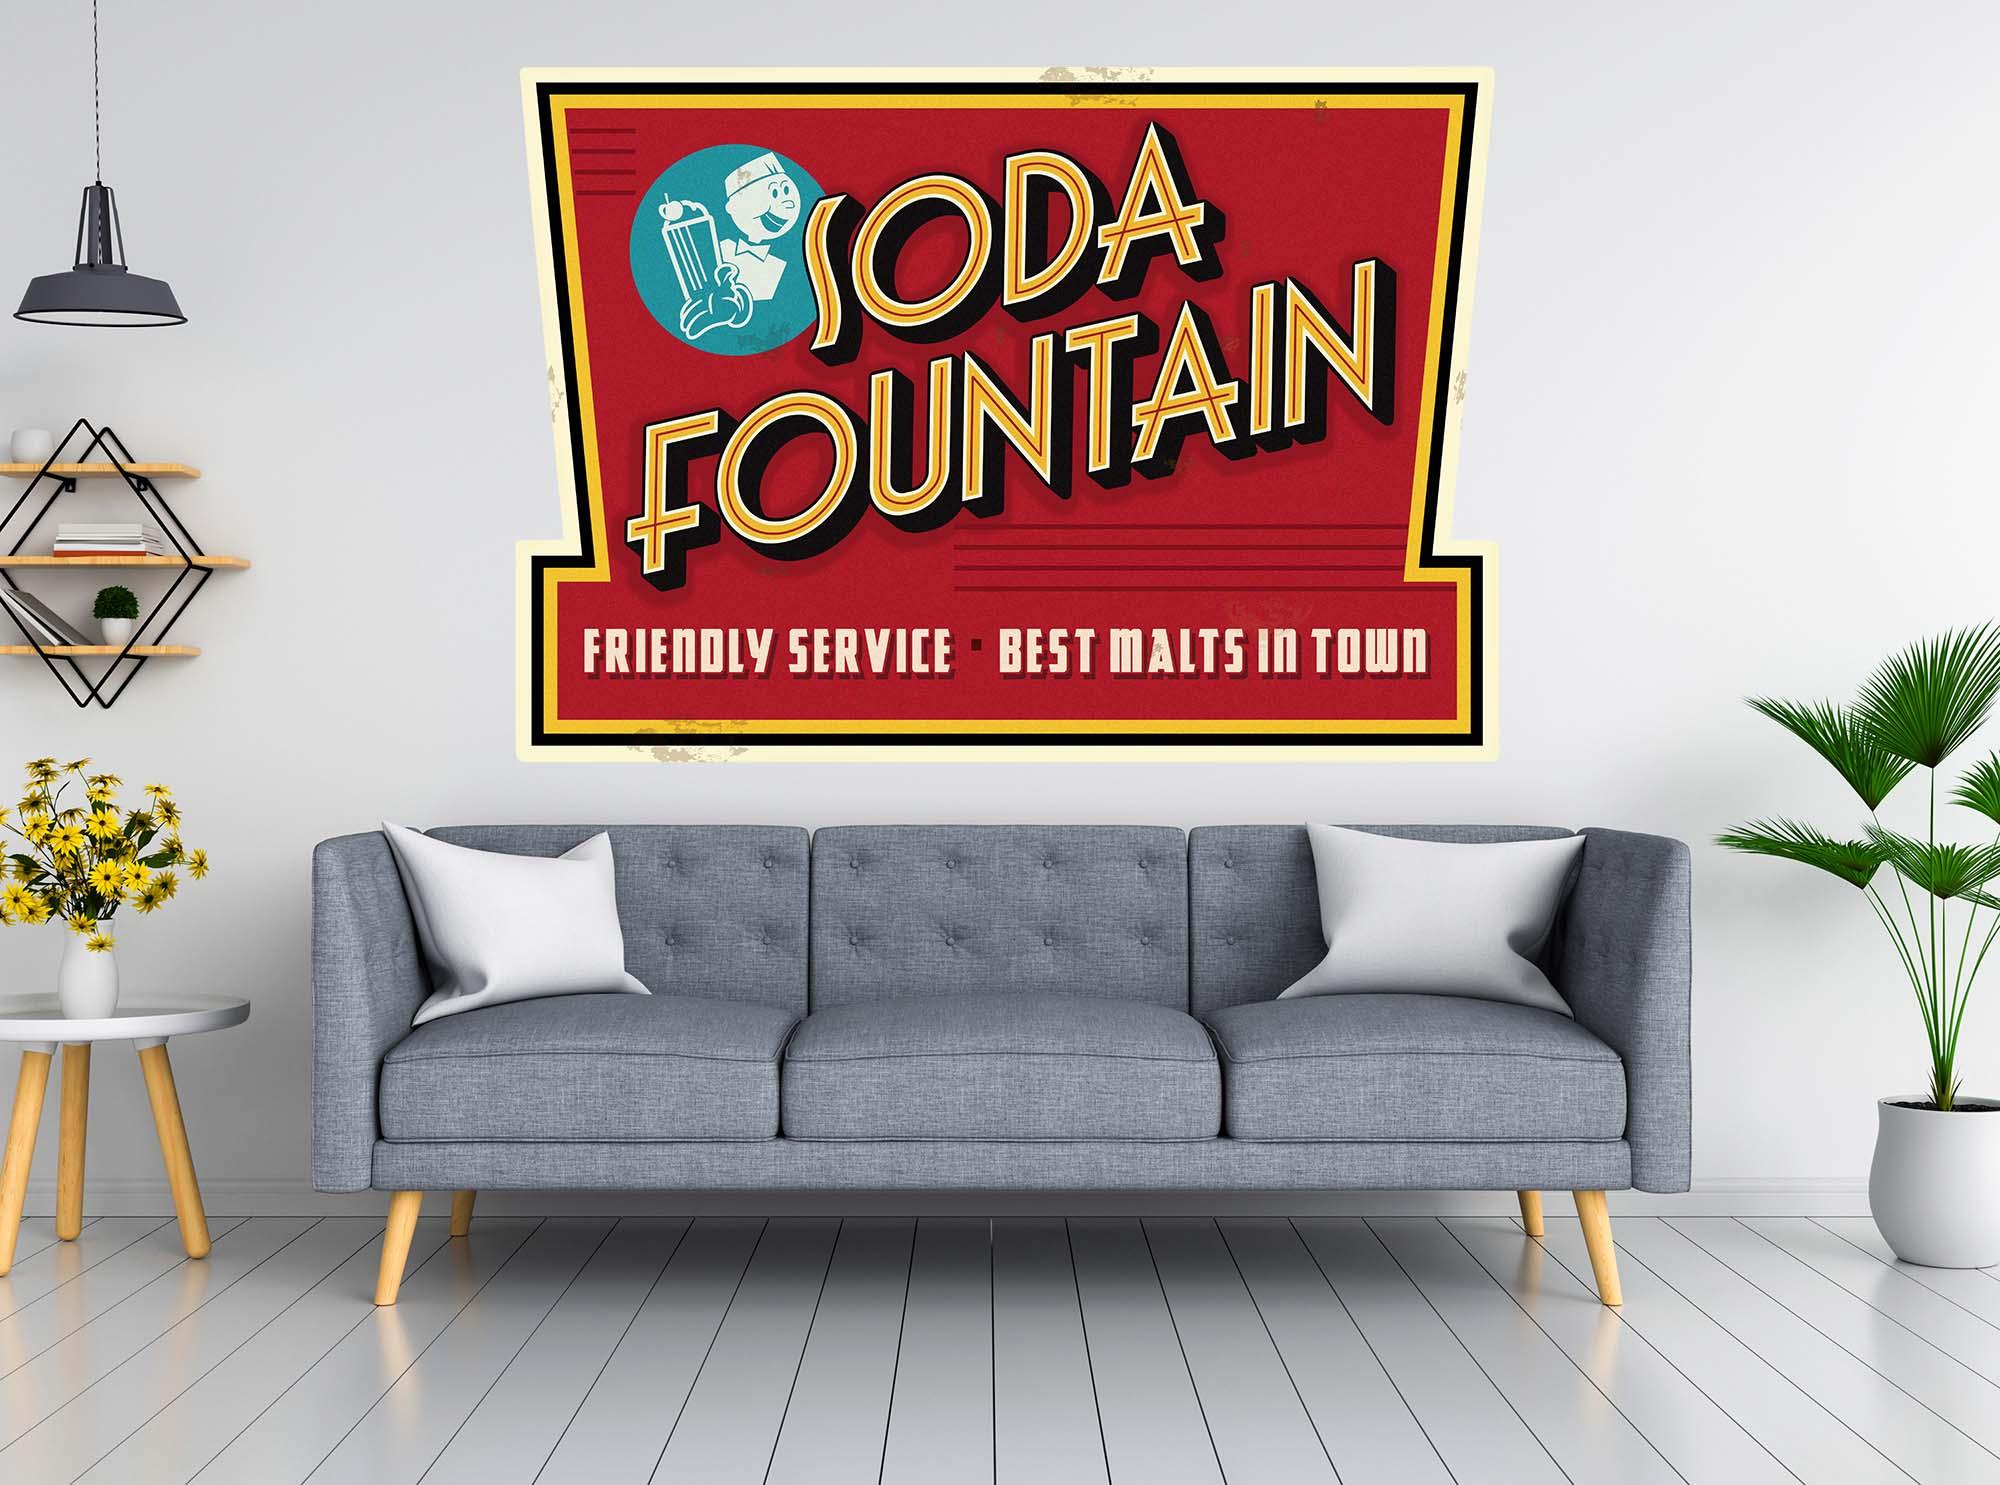 CoolWalls.ca DieCut Soda Fountain Sign Decal, Wall Decal, Peel-N-Stick and Removes Easily Anytime